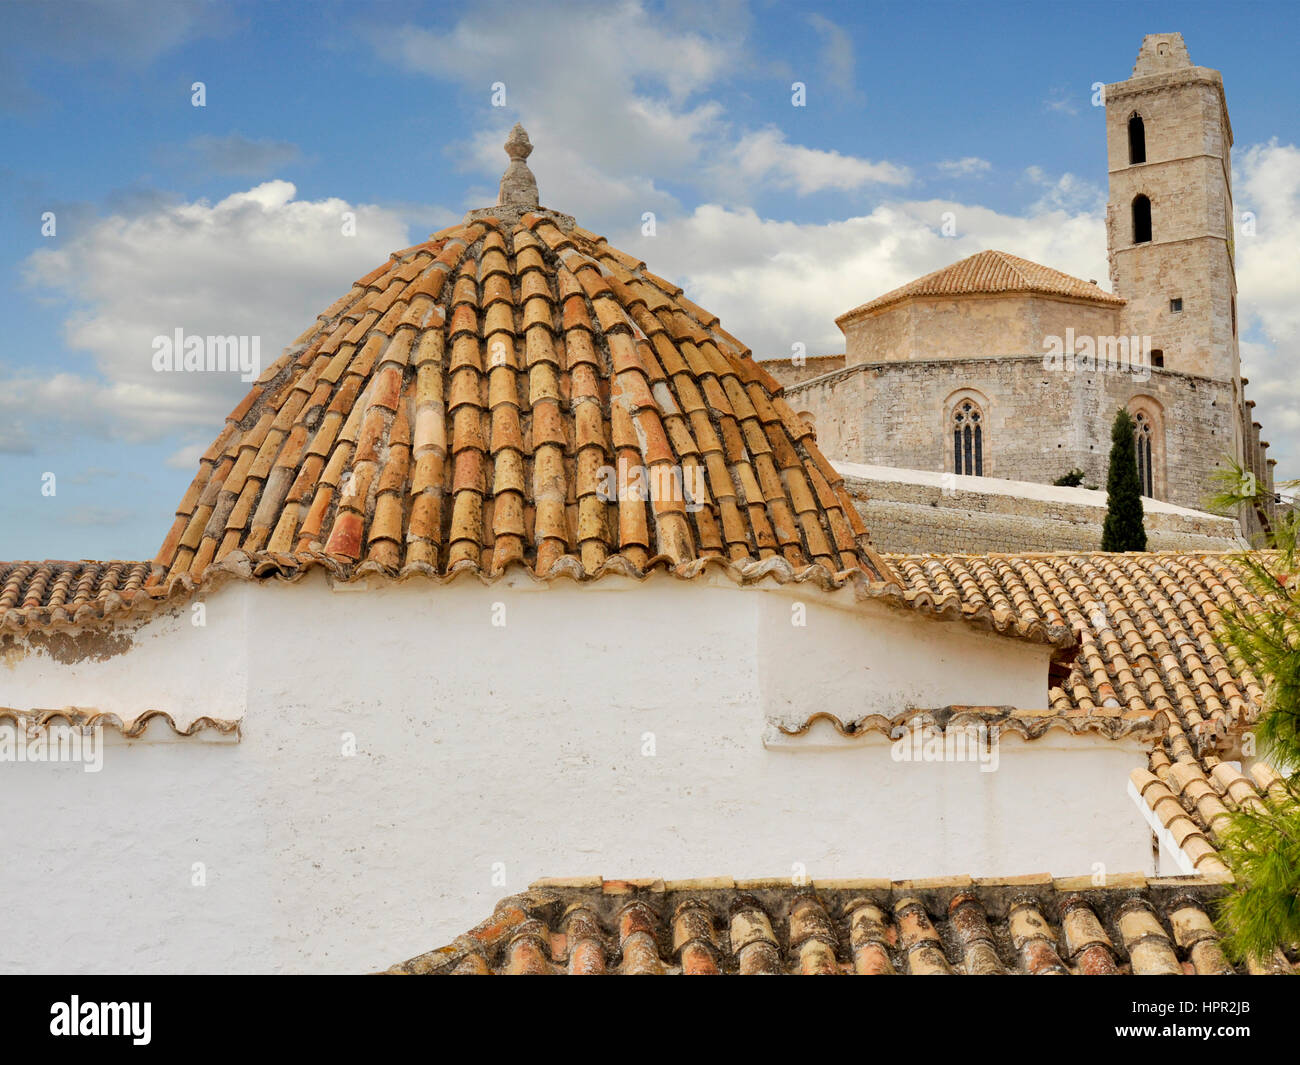 Dome of church and the cathedral in the area of the fortress above the city of Ibiza Stock Photo